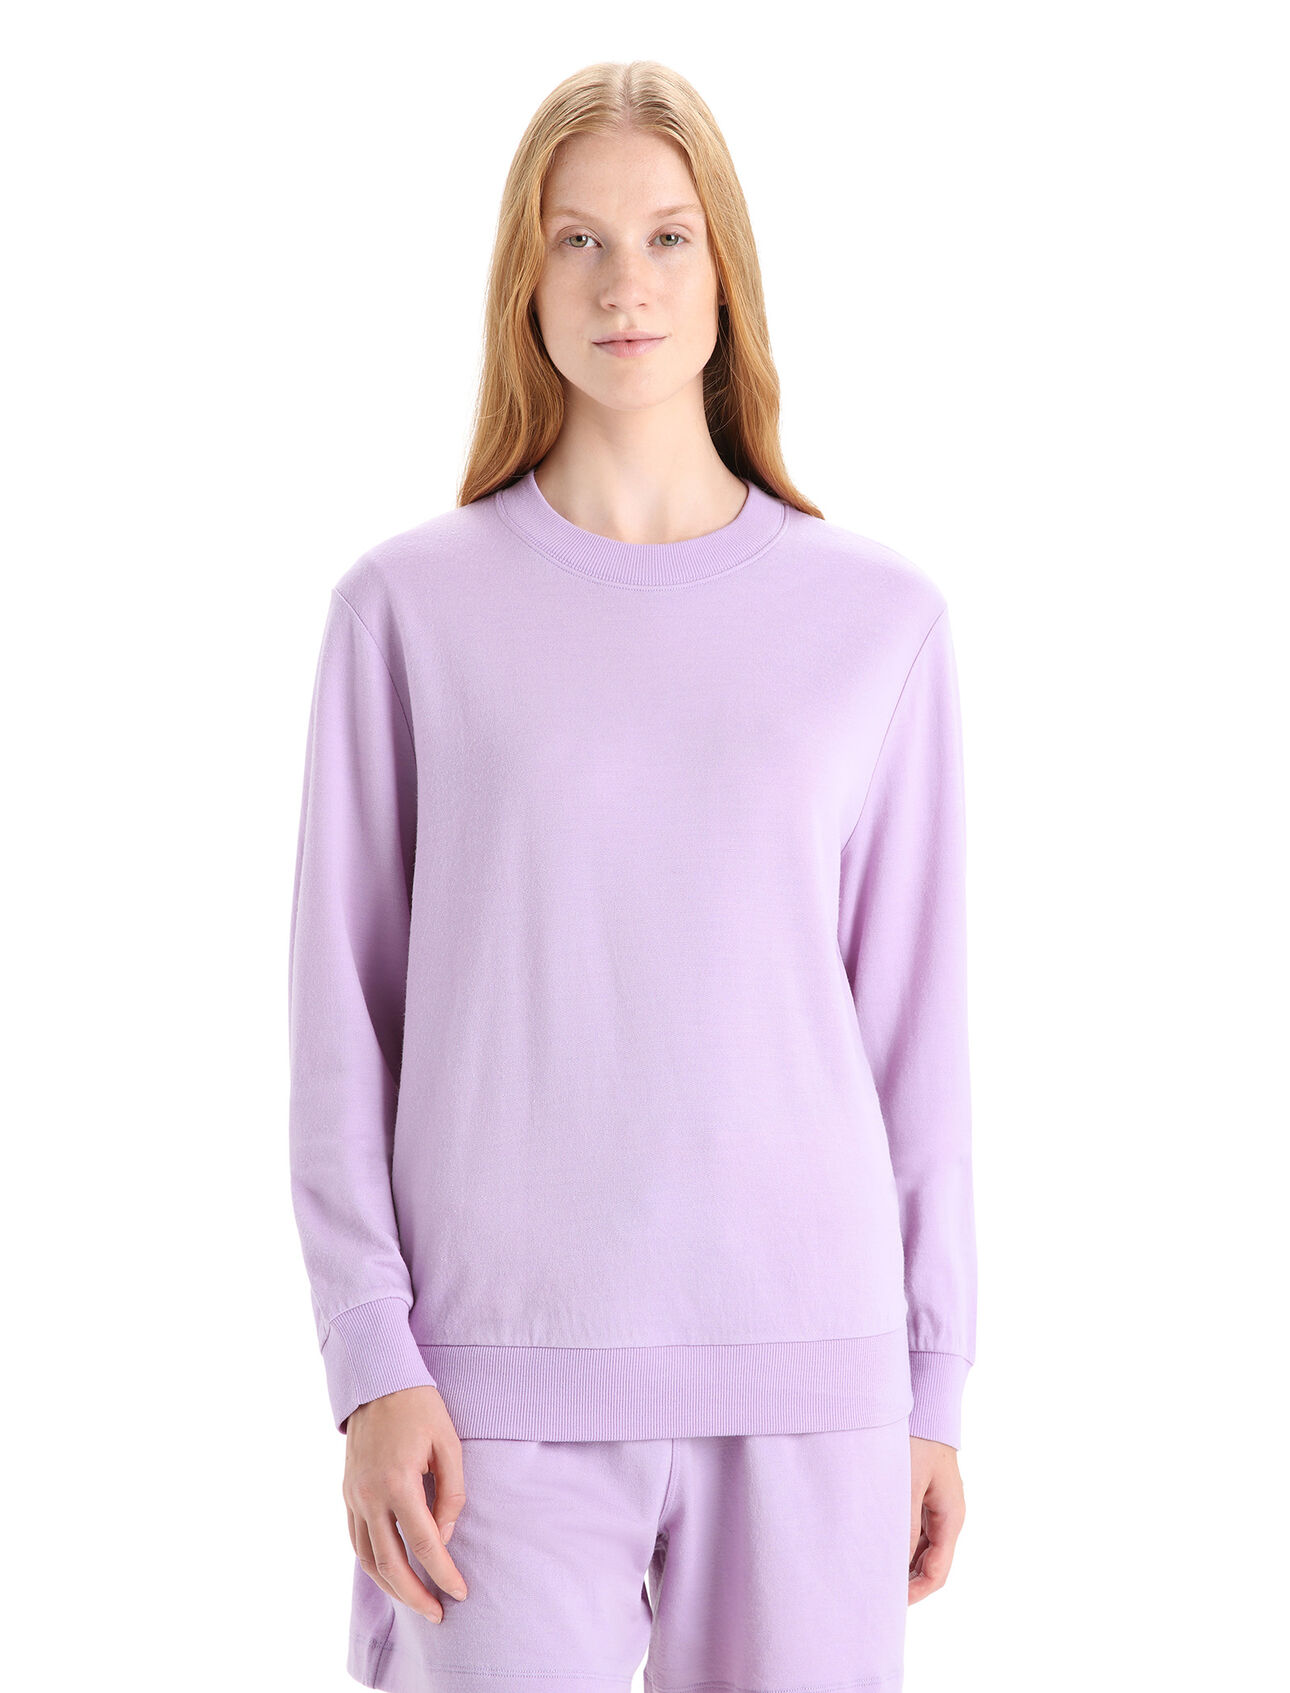 Womens Merino Crush Long Sleeve Sweatshirt With a clean and classic design that's great for layering, the Crush Long Sleeve Sweatshirt offers all-day comfort with a casual fit and look.